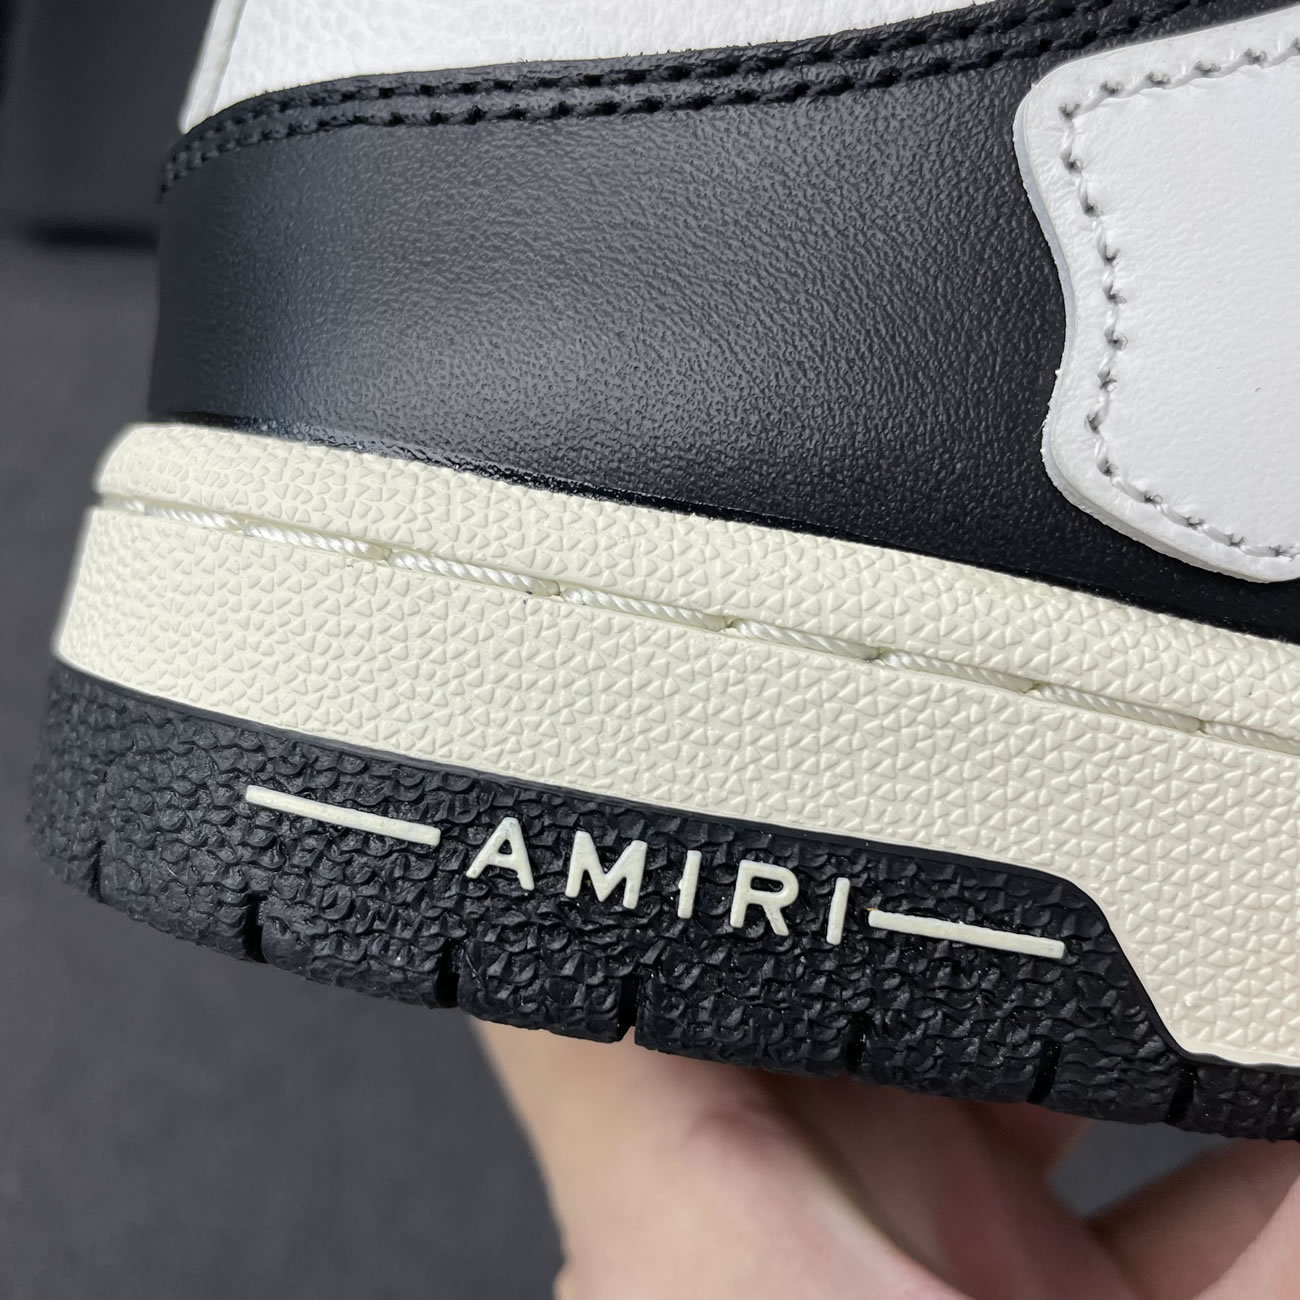 A M I R I Skel Top Low Leather Sneakers Black White Anpkick Mfs003 000 (7) - newkick.org